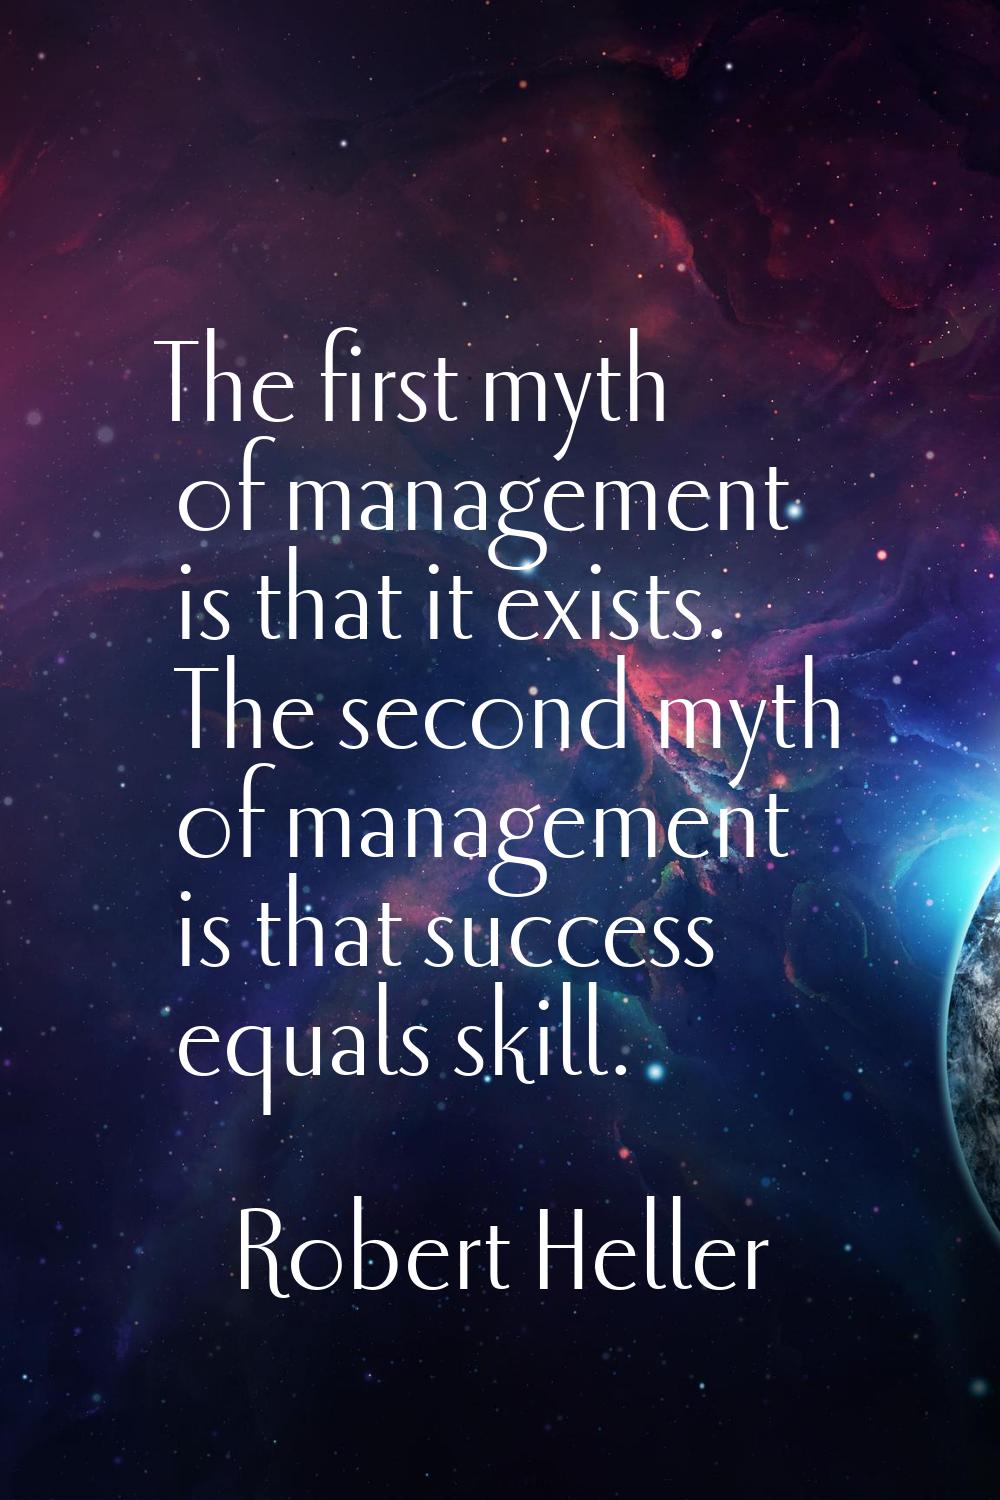 The first myth of management is that it exists. The second myth of management is that success equal